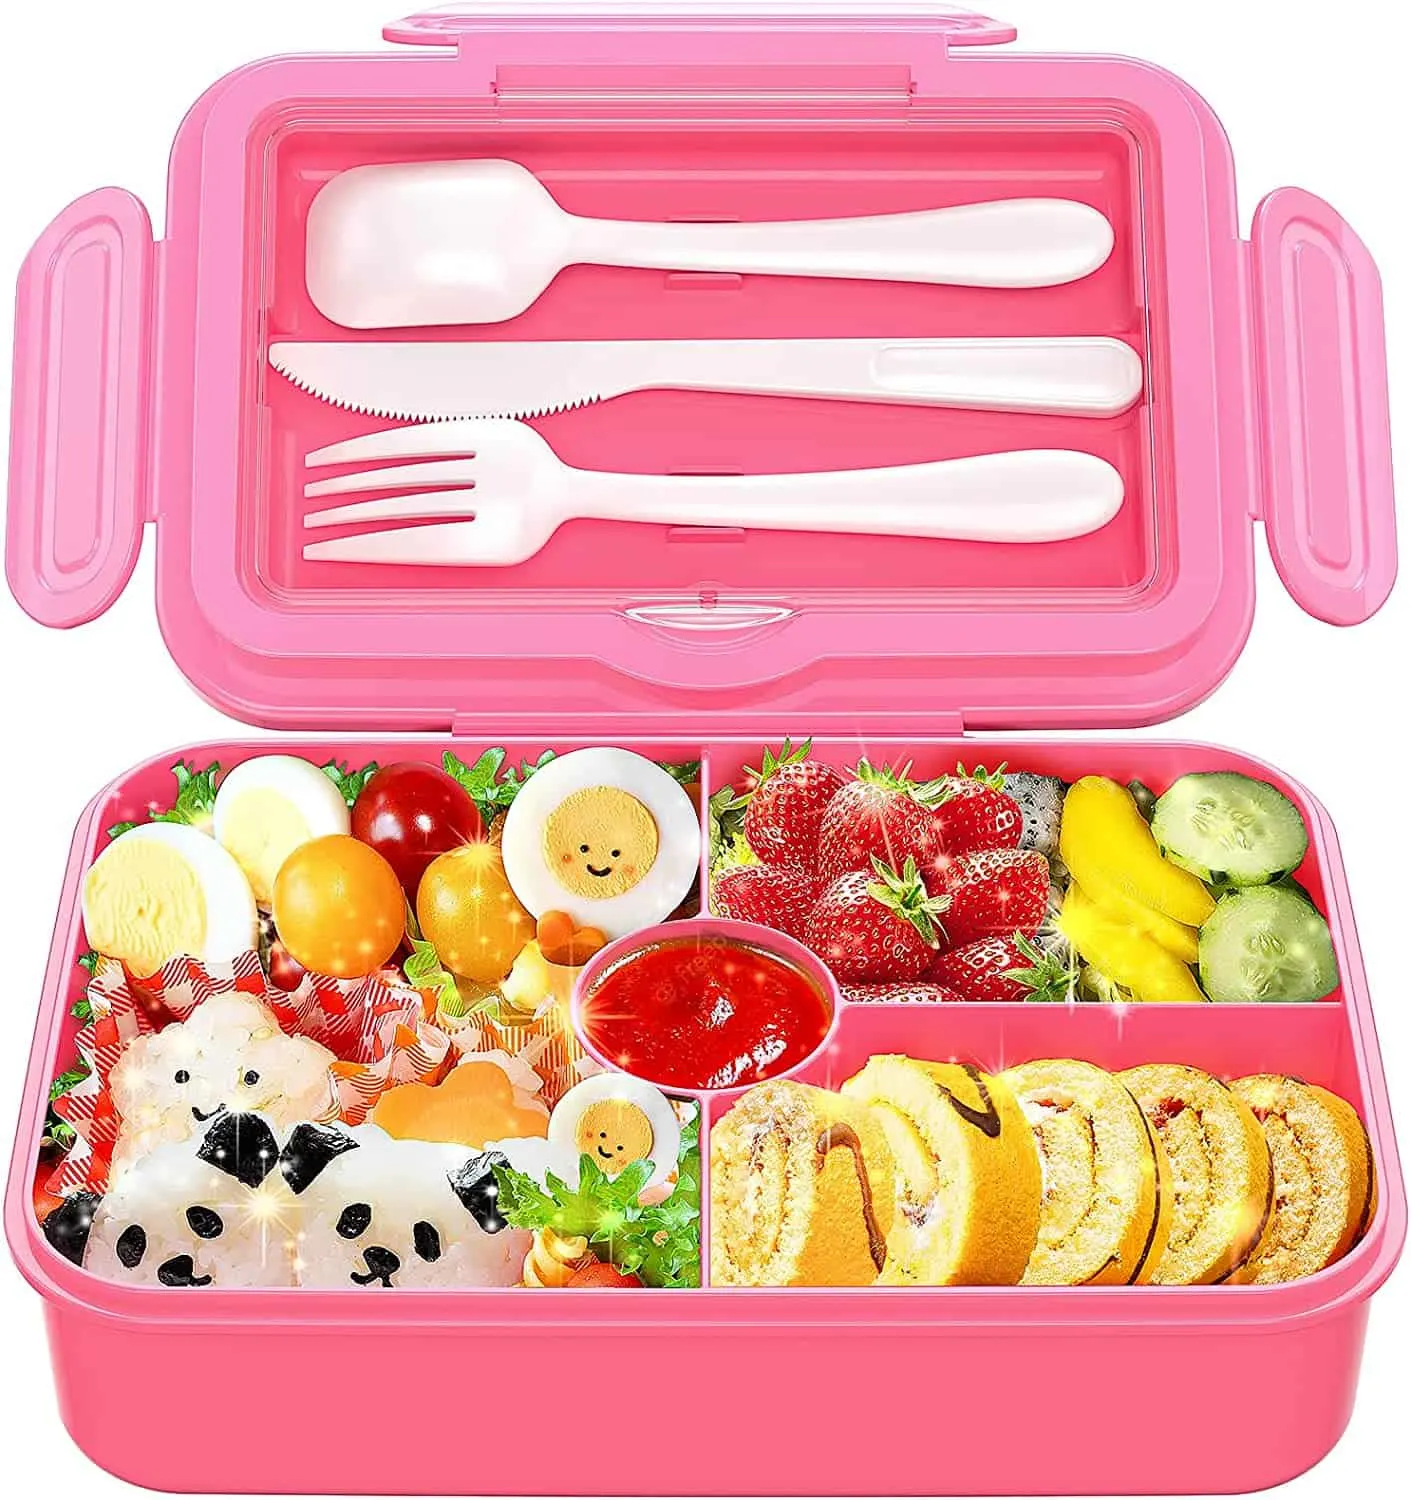 RUVALINO Bento Lunch Box for Kids, 5-Compartment Bento-Style Kids Lunch Box  with Utensils, Leak-Proo…See more RUVALINO Bento Lunch Box for Kids